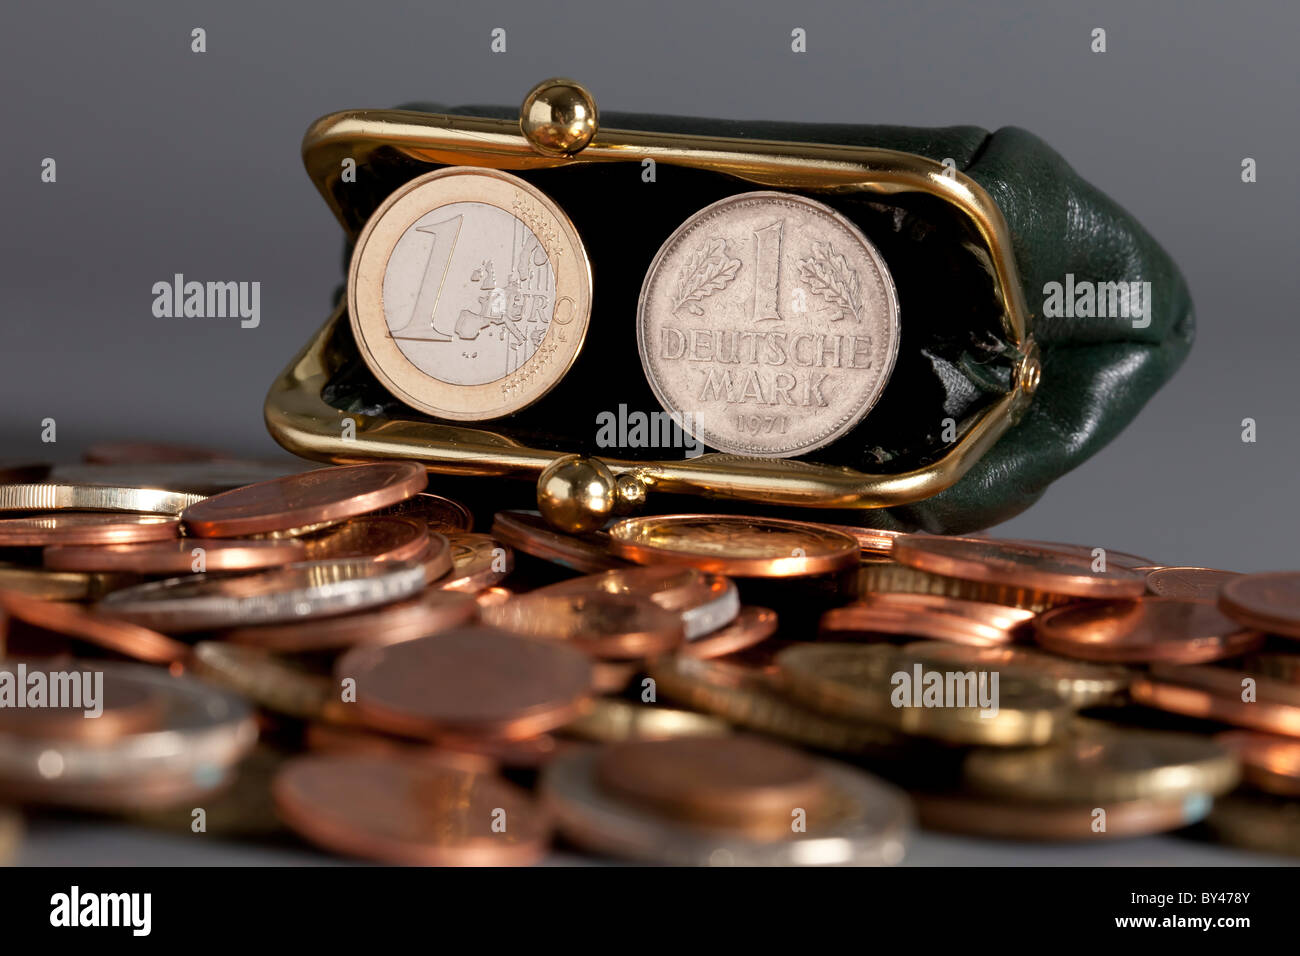 1 Euro coin and an old German 1 Deutsche Mark coin, former and new currency of Germany Stock Photo